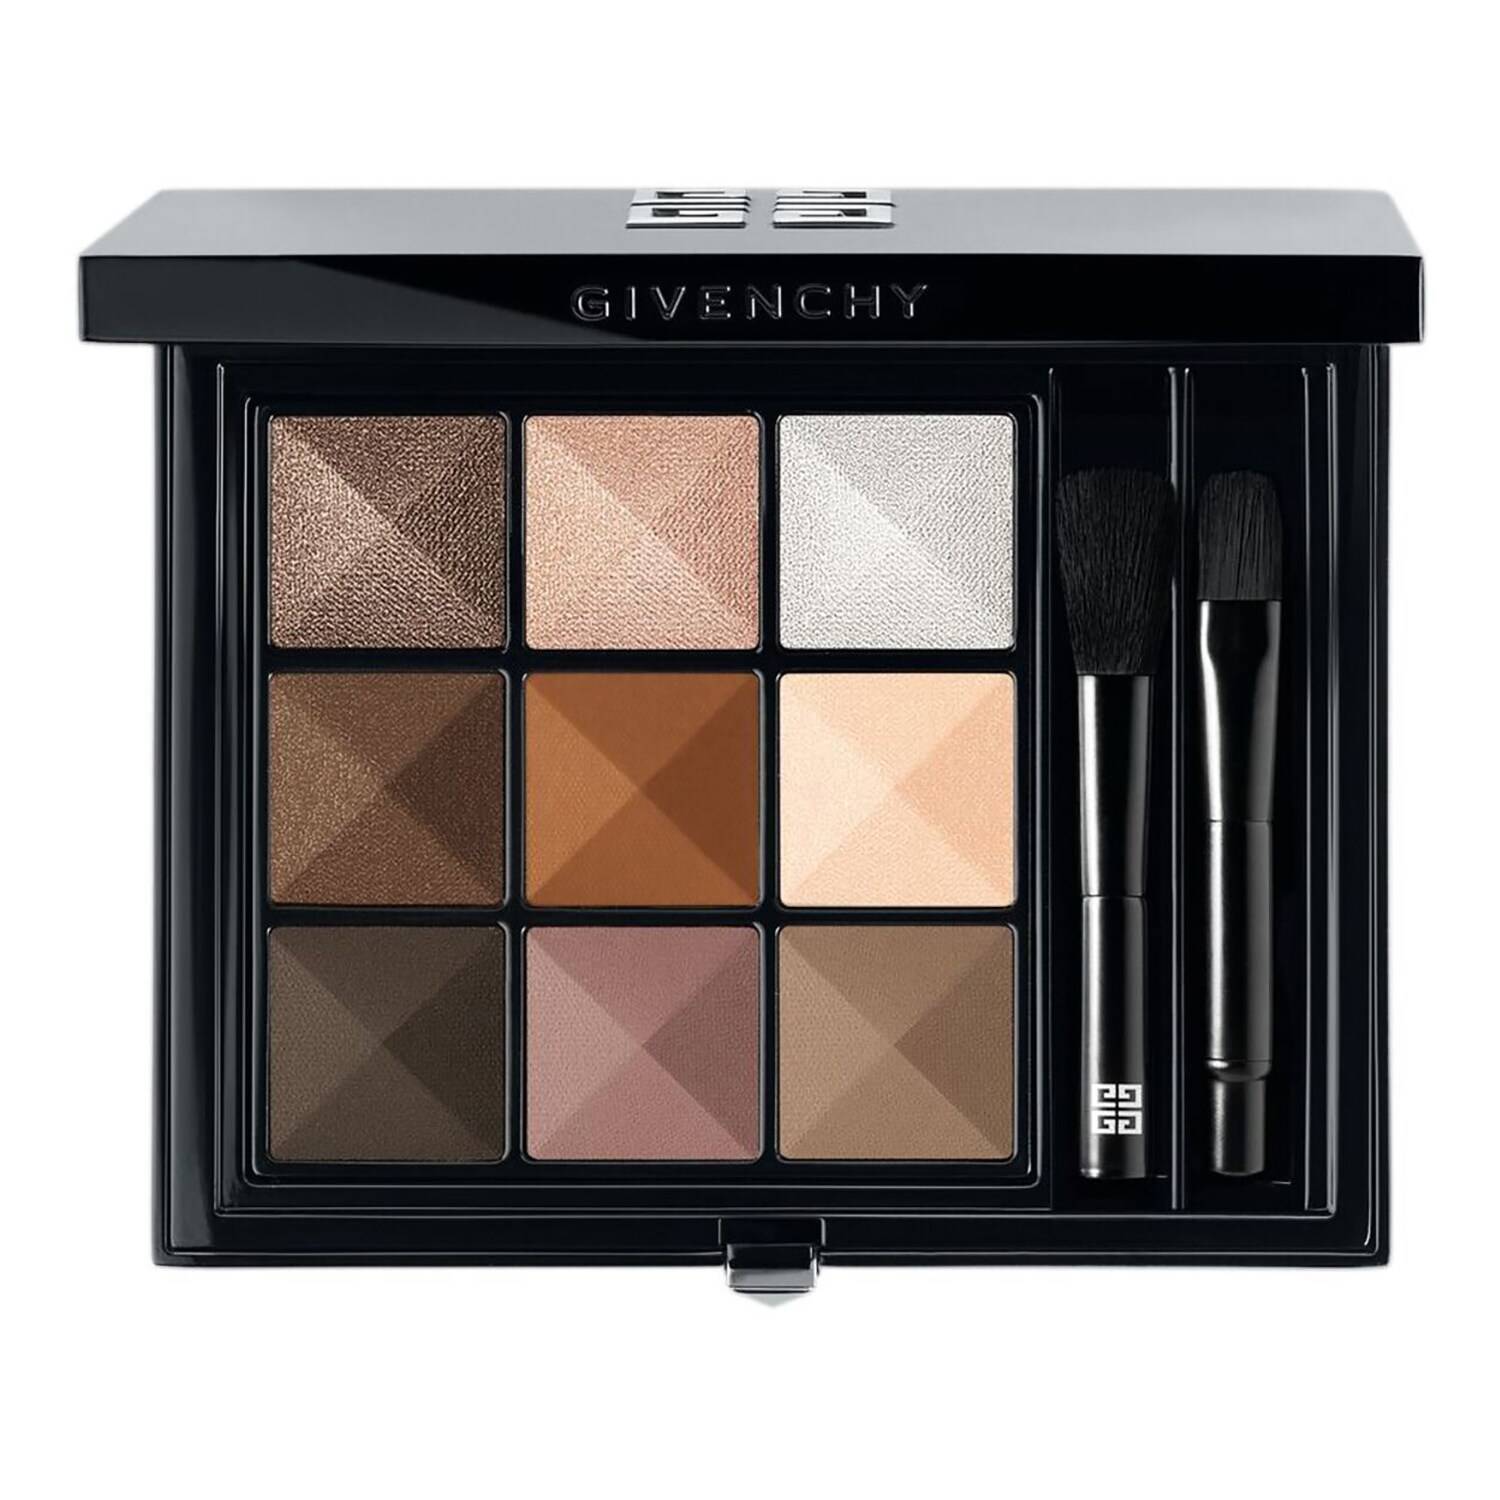 Givenchy Le 9 De Givenchy Eyeshadow Palette 8G N12